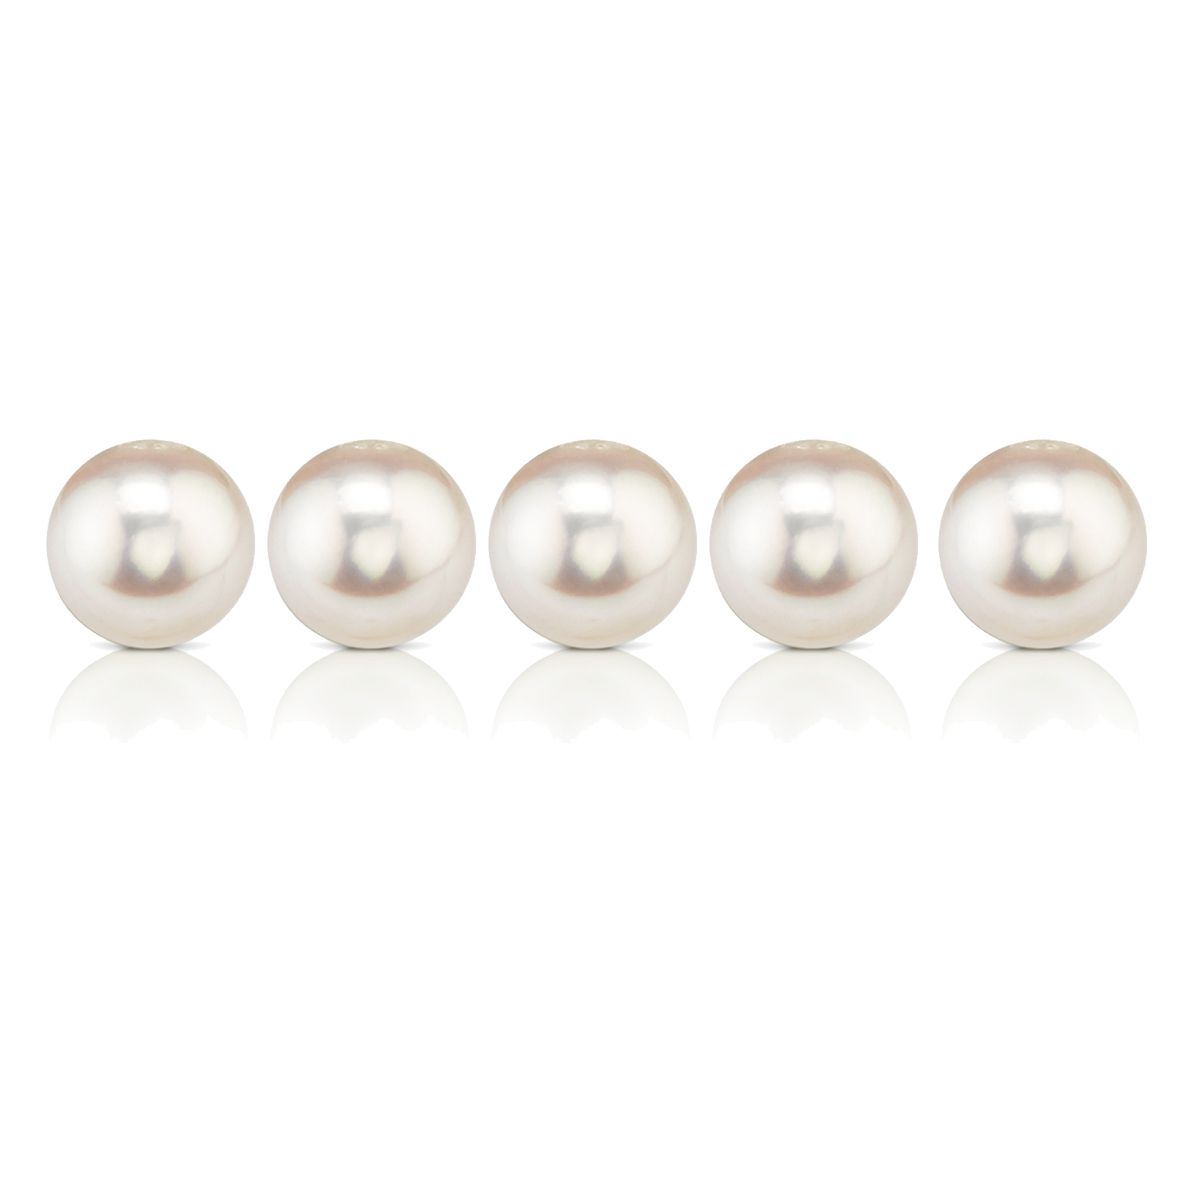 Add-A-Pearl Single Gift Pearl | Jewelers in Rochester, NY